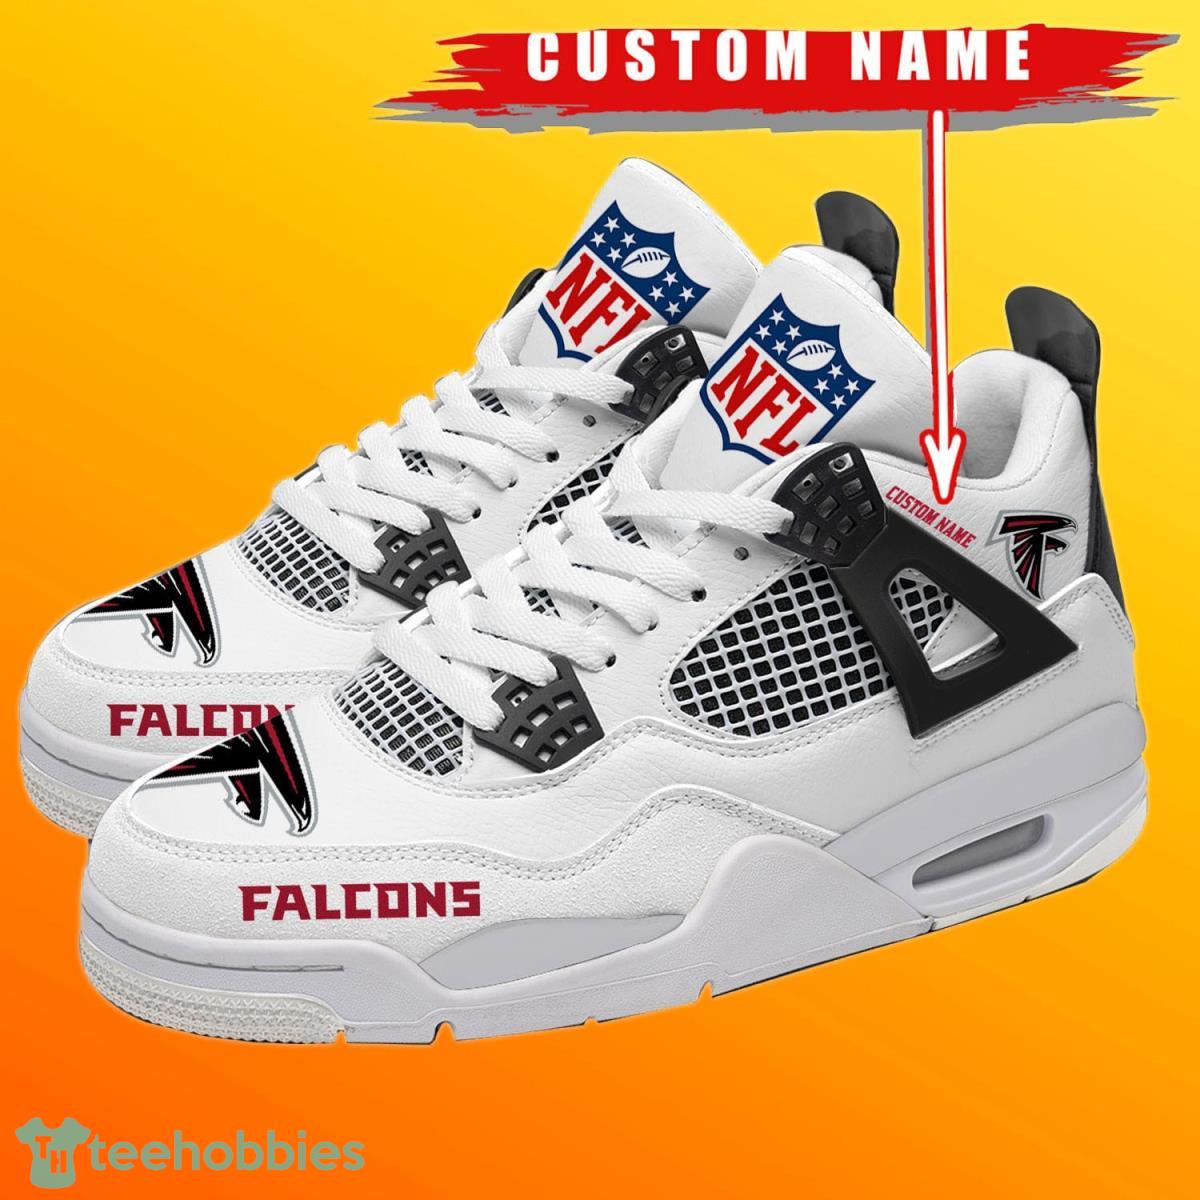 Atlanta Falcons Personalized Name NFL Air Jordan 4 Trending Sneaker Style Gift For Fans Product Photo 1